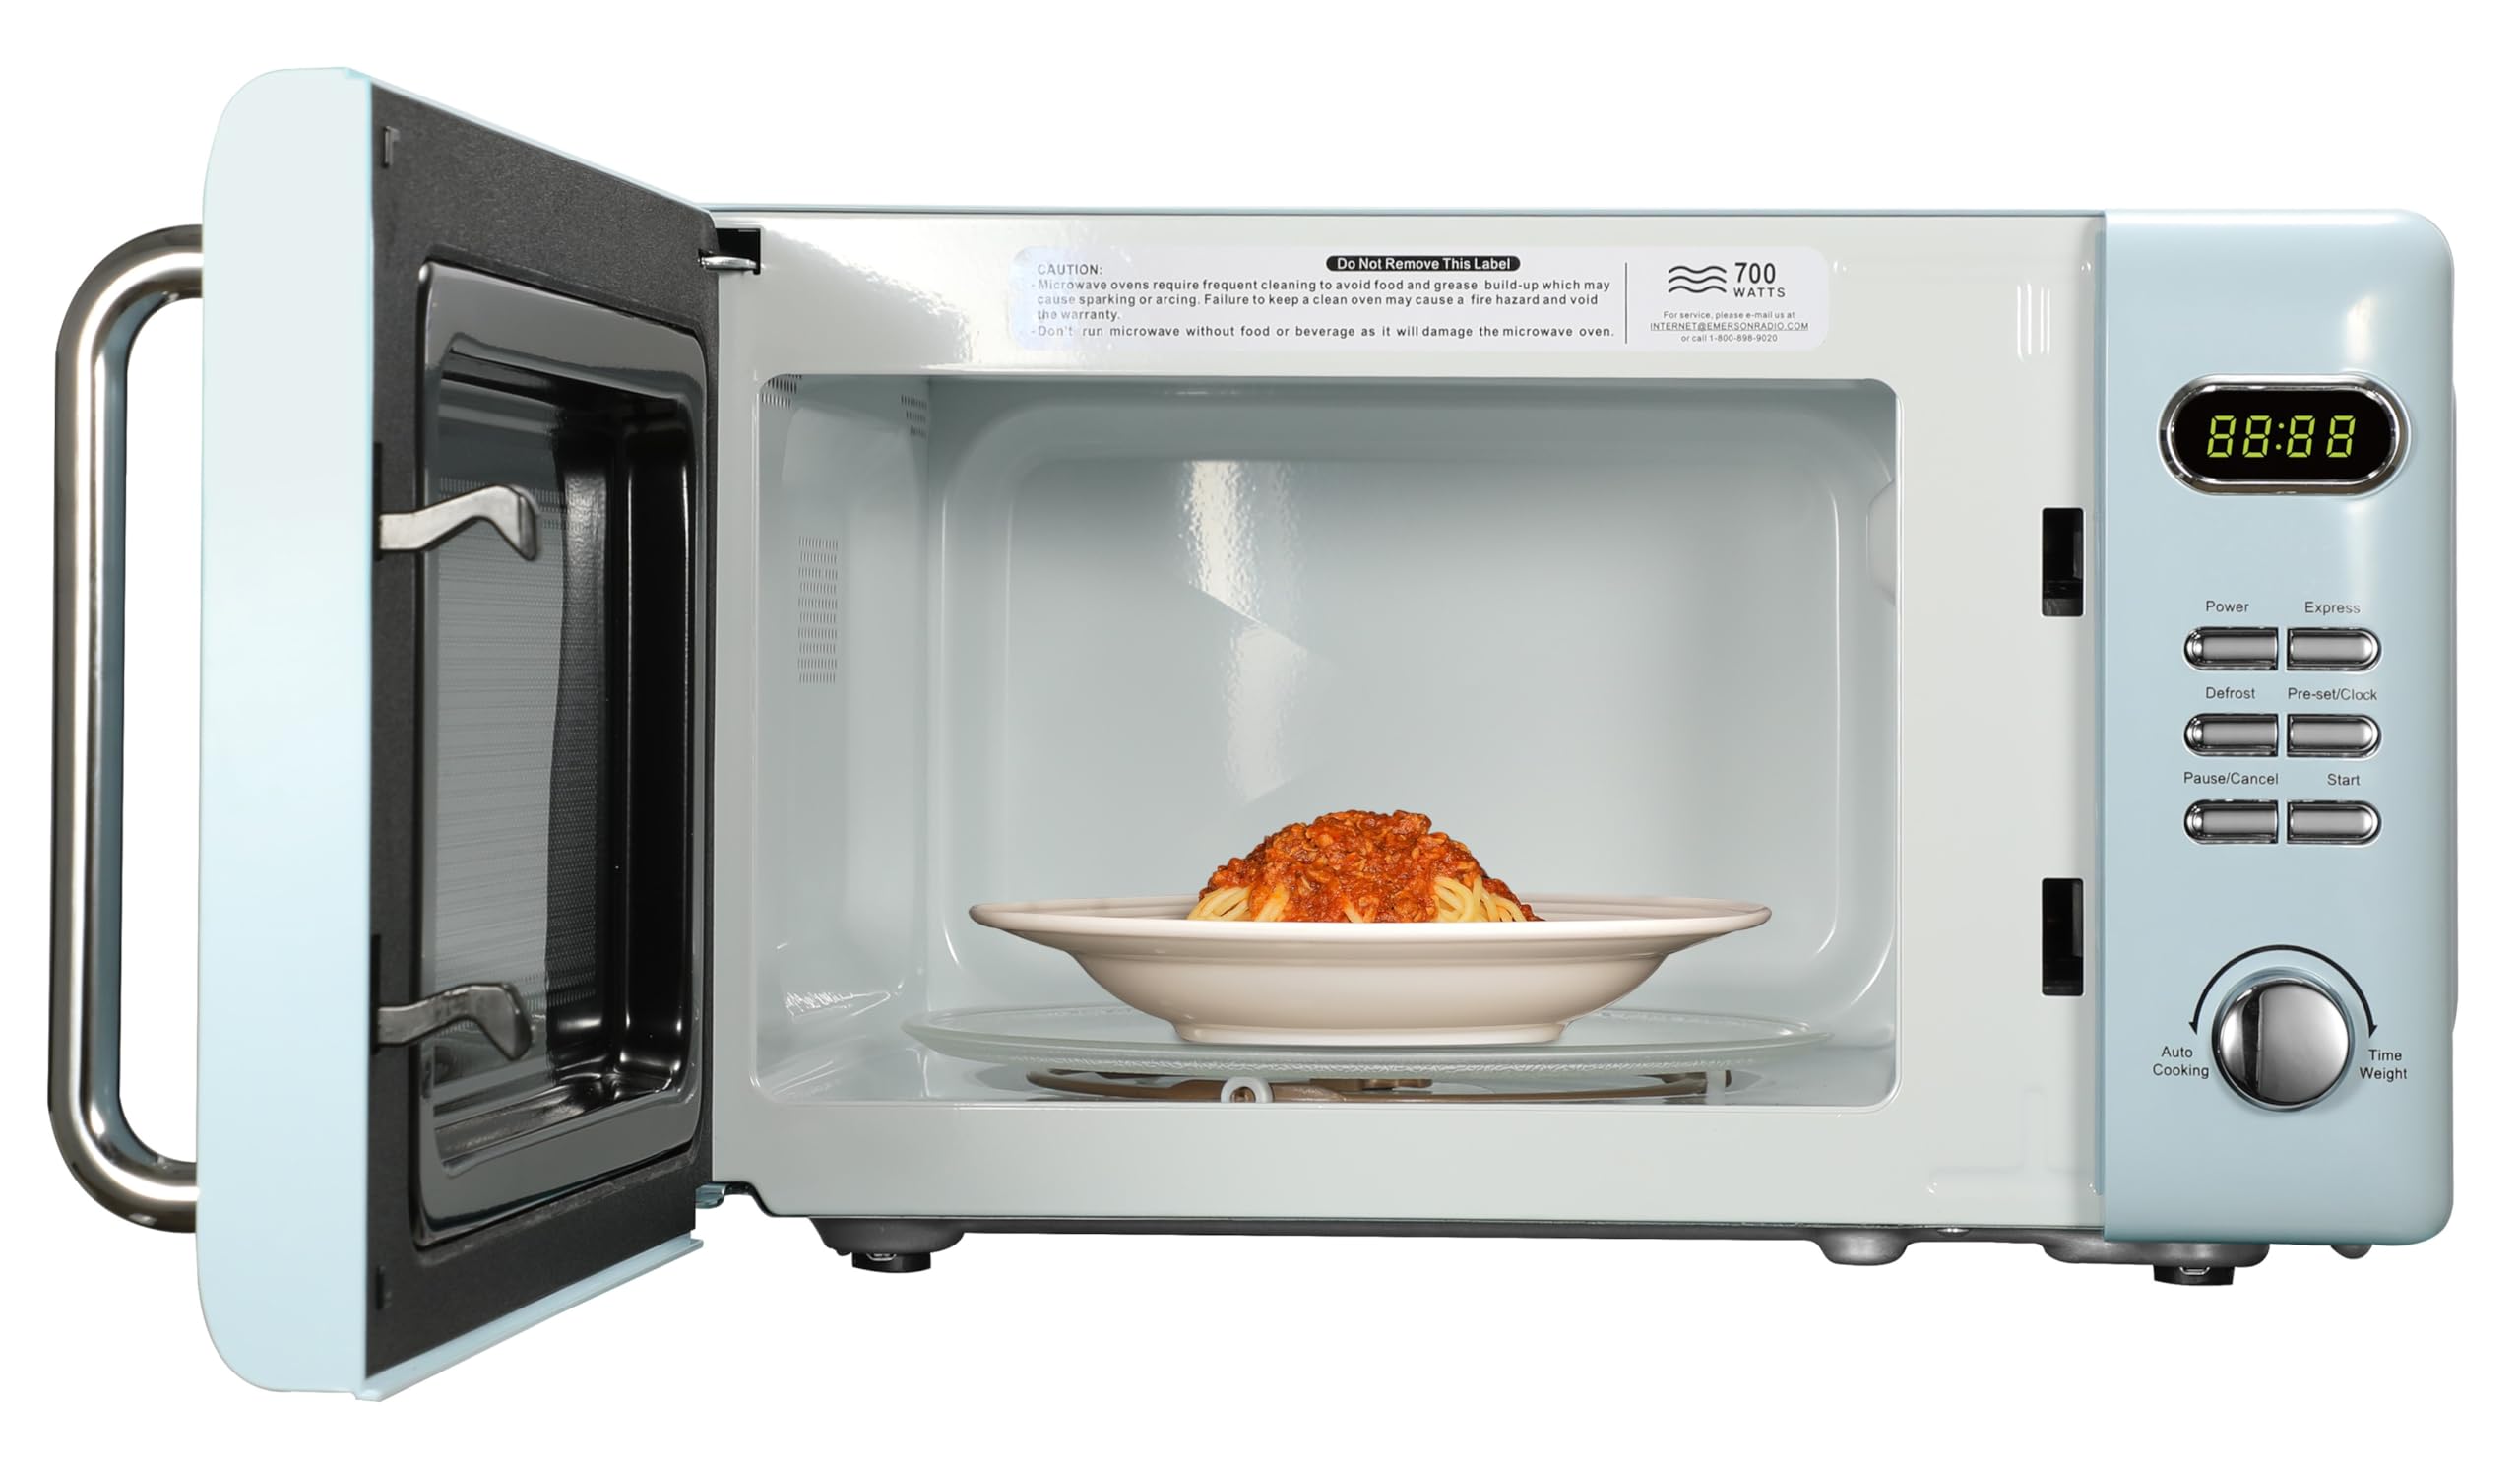 Emerson MWR7020BL-N Retro Digital Microwave Oven with Timer & LED Display 700W, 5 Micro Power Levels, 8 Pre-Programmed Settings, Time & Weight Defrost with Child Safe Lock, 0.7 Cu. Ft, Blue